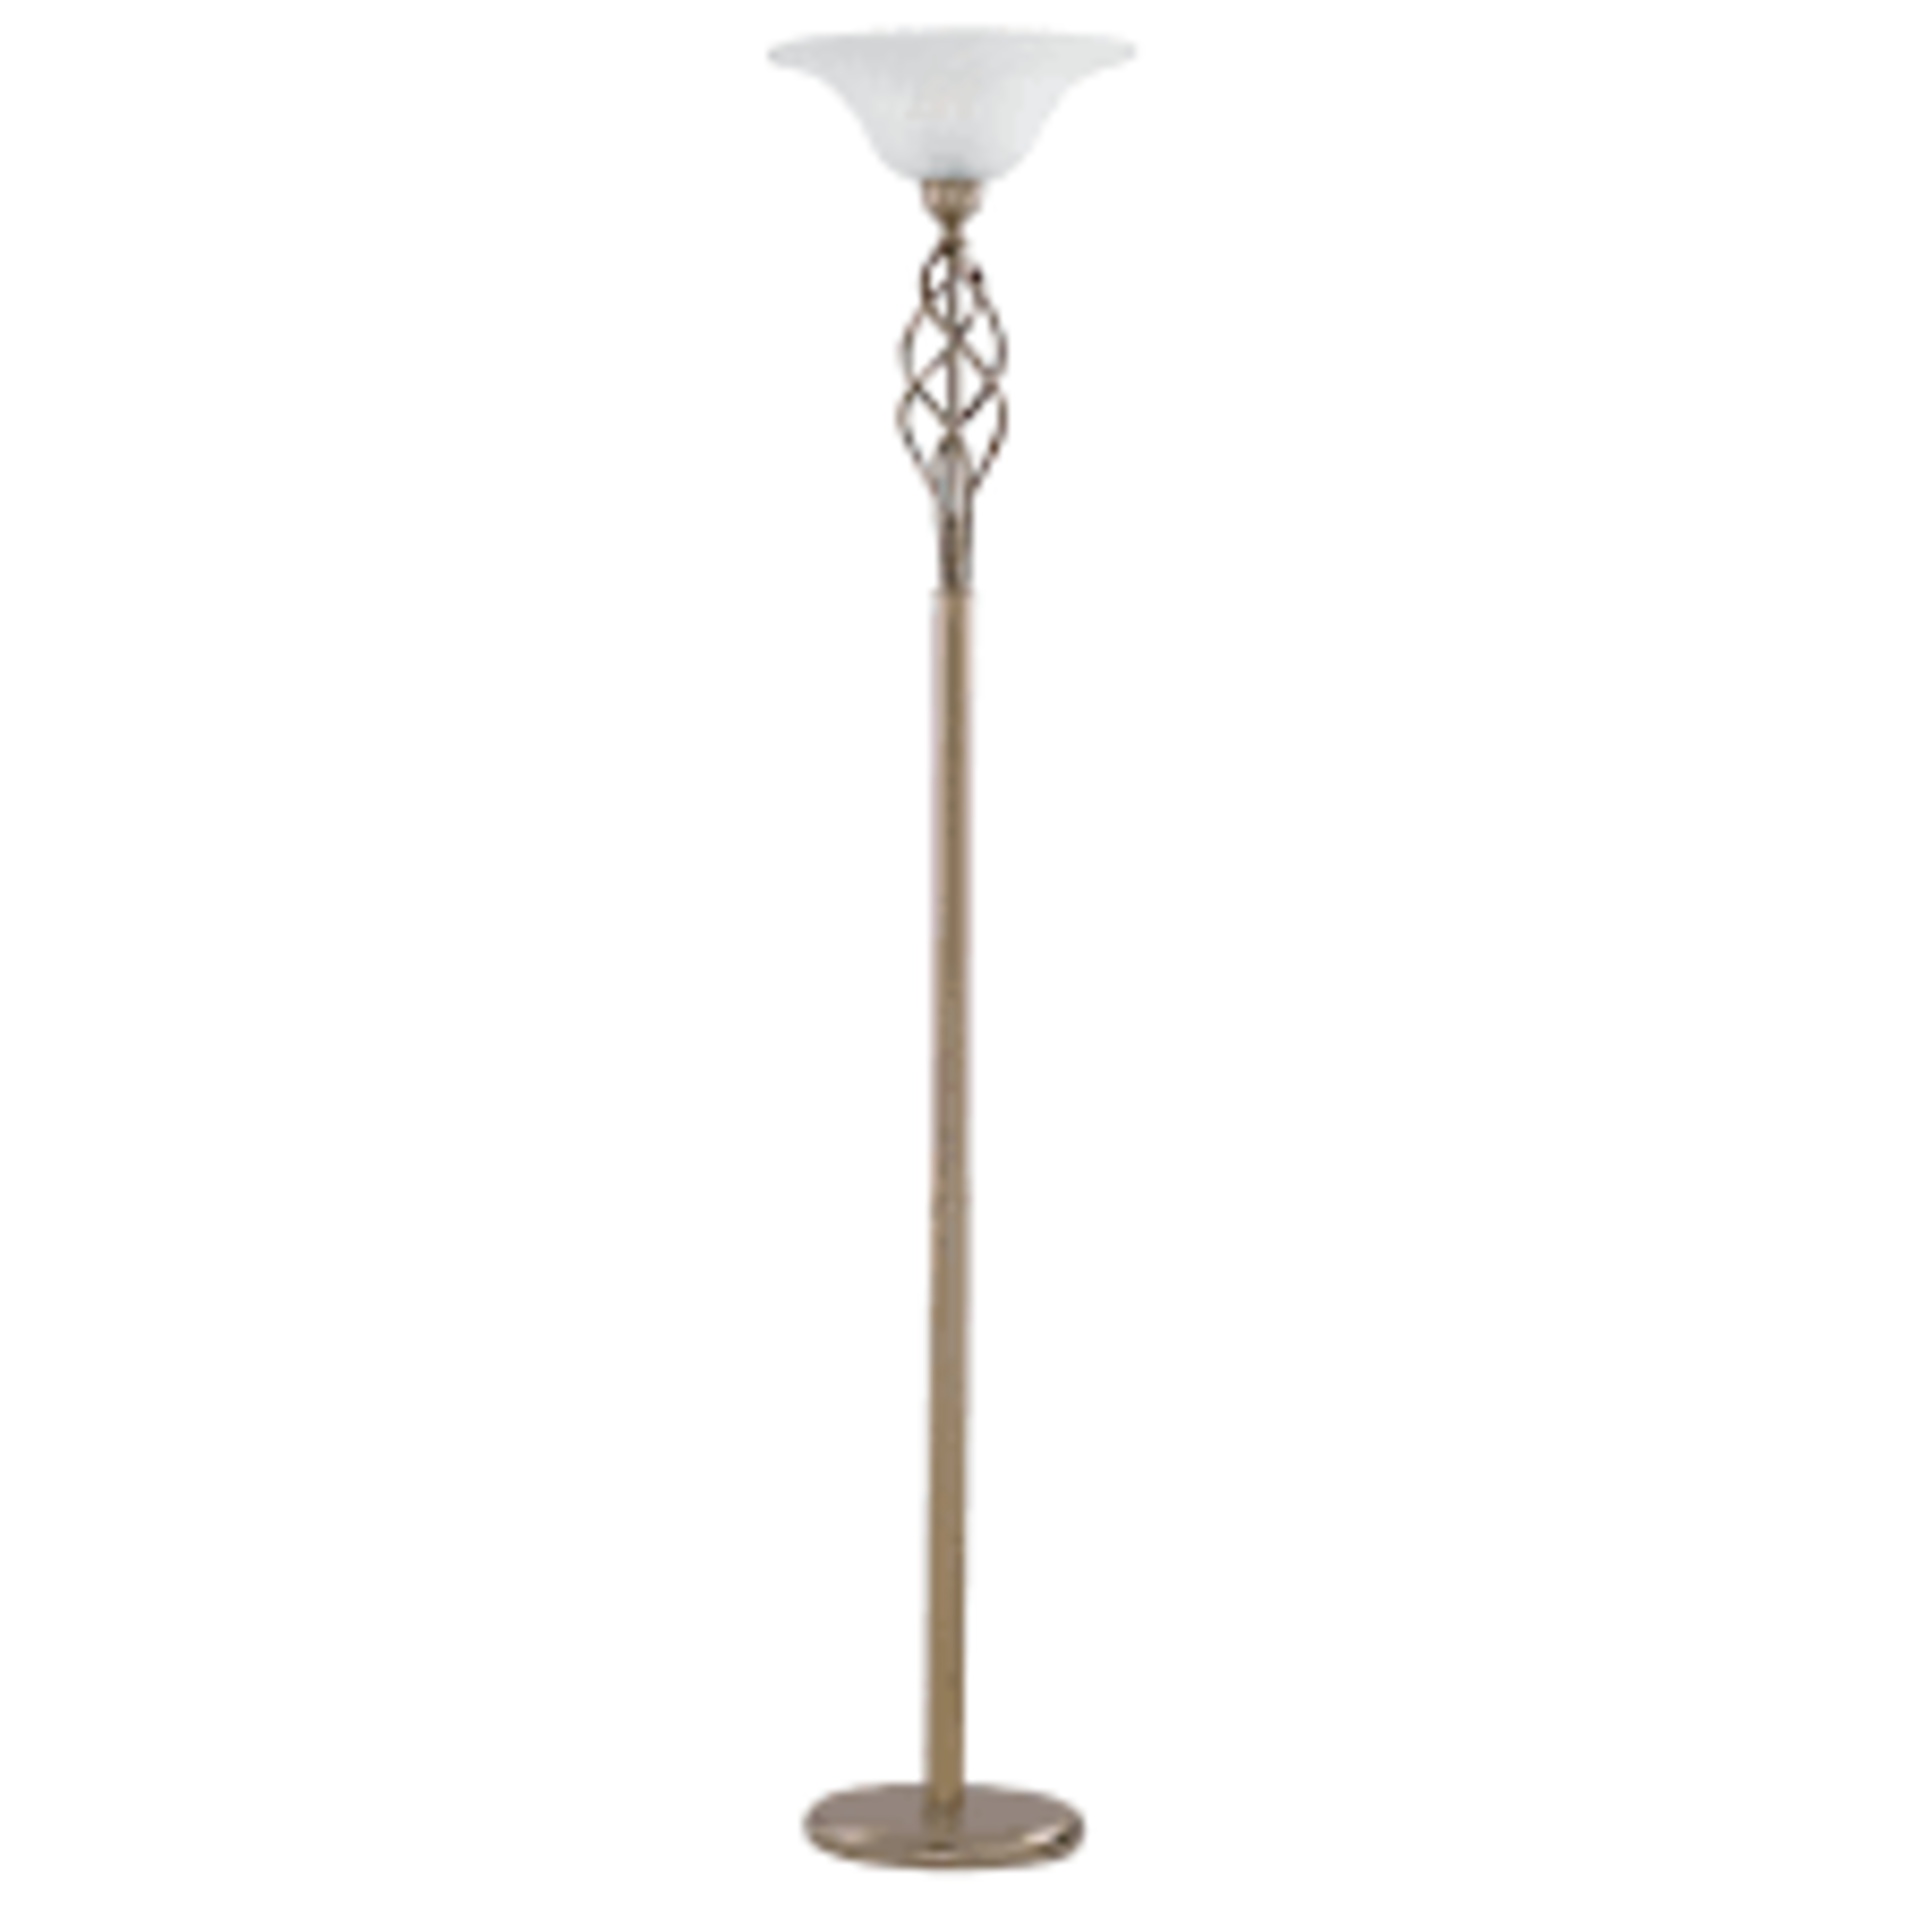 1 x Searchlight Floor Lamp in Antique Brass - Ref: 6021AB - New and Boxed - RRP: £100.00 - Image 4 of 4